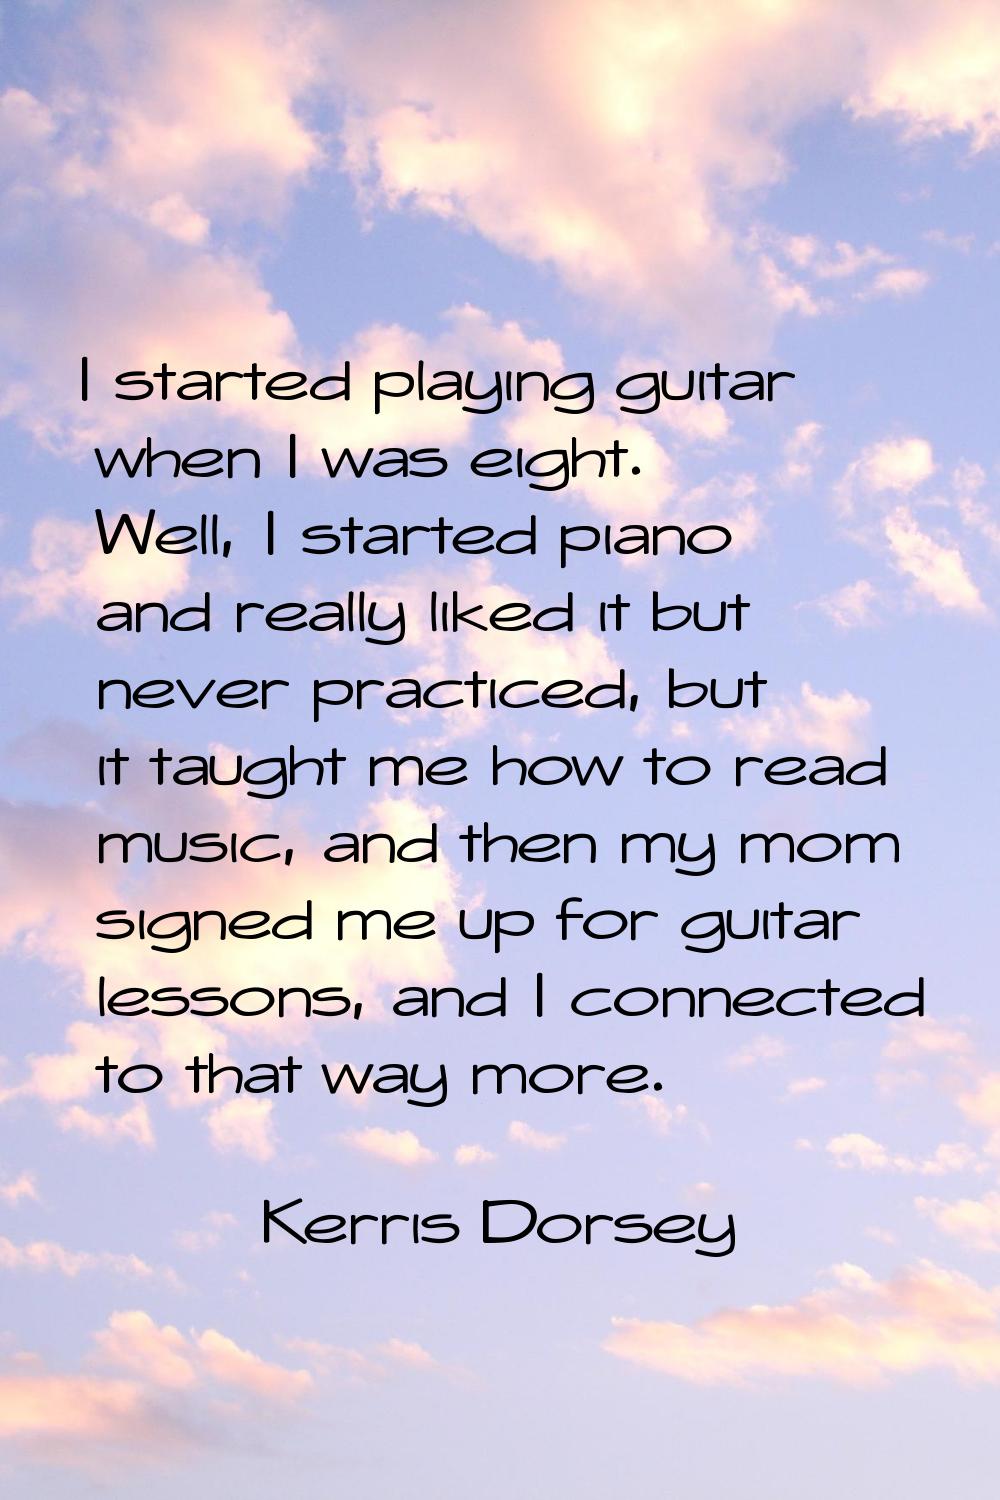 I started playing guitar when I was eight. Well, I started piano and really liked it but never prac